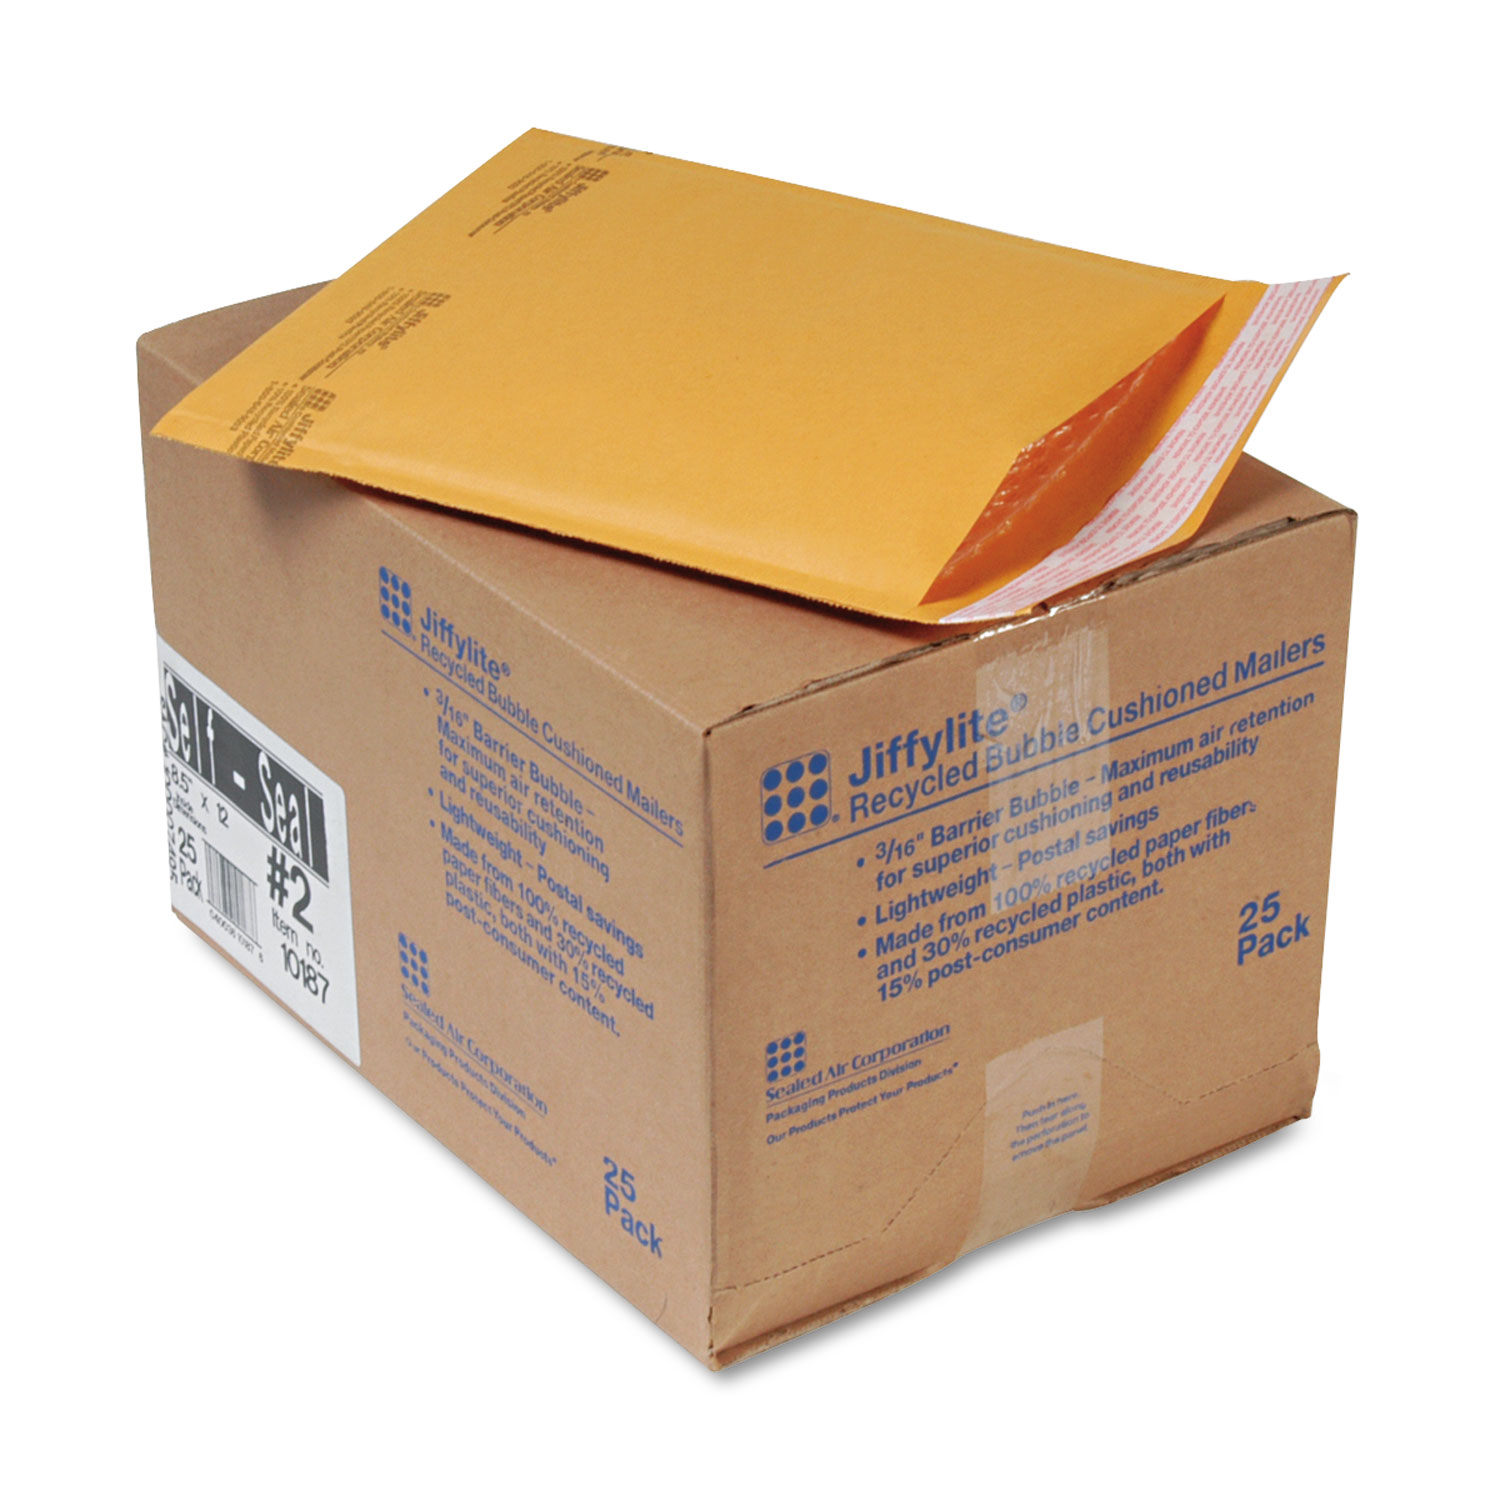  Sealed Air 10187 Jiffylite Self-Seal Bubble Mailer, #2, Barrier Bubble Lining, Self-Adhesive Closure, 8.5 x 12, Golden Brown Kraft, 25/Carton (SEL10187) 